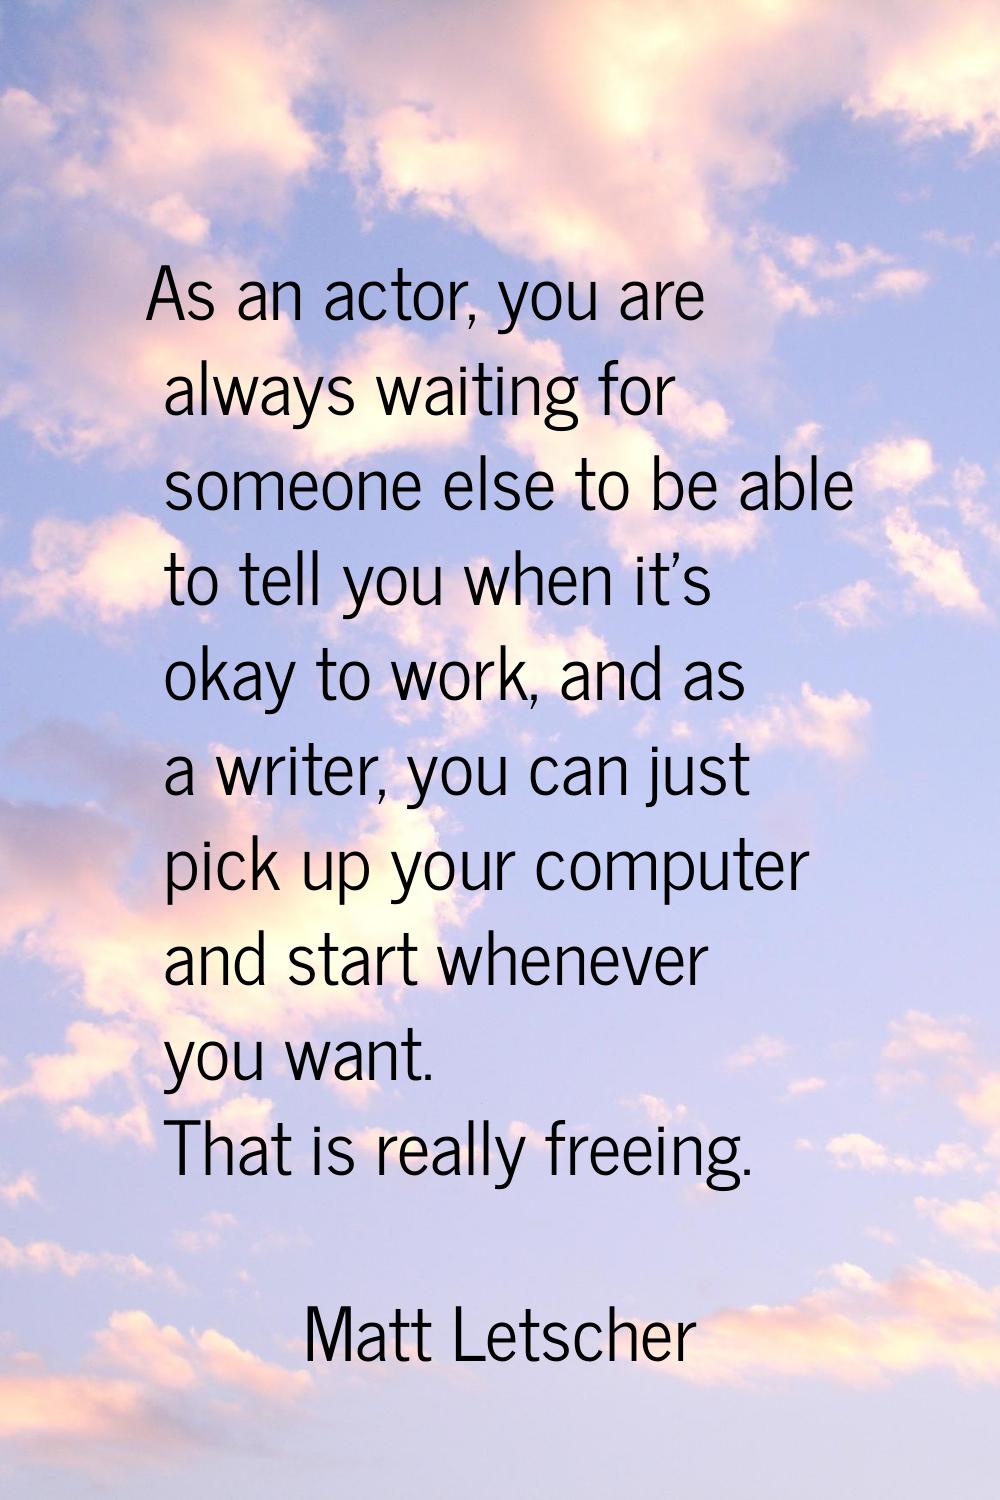 As an actor, you are always waiting for someone else to be able to tell you when it's okay to work,